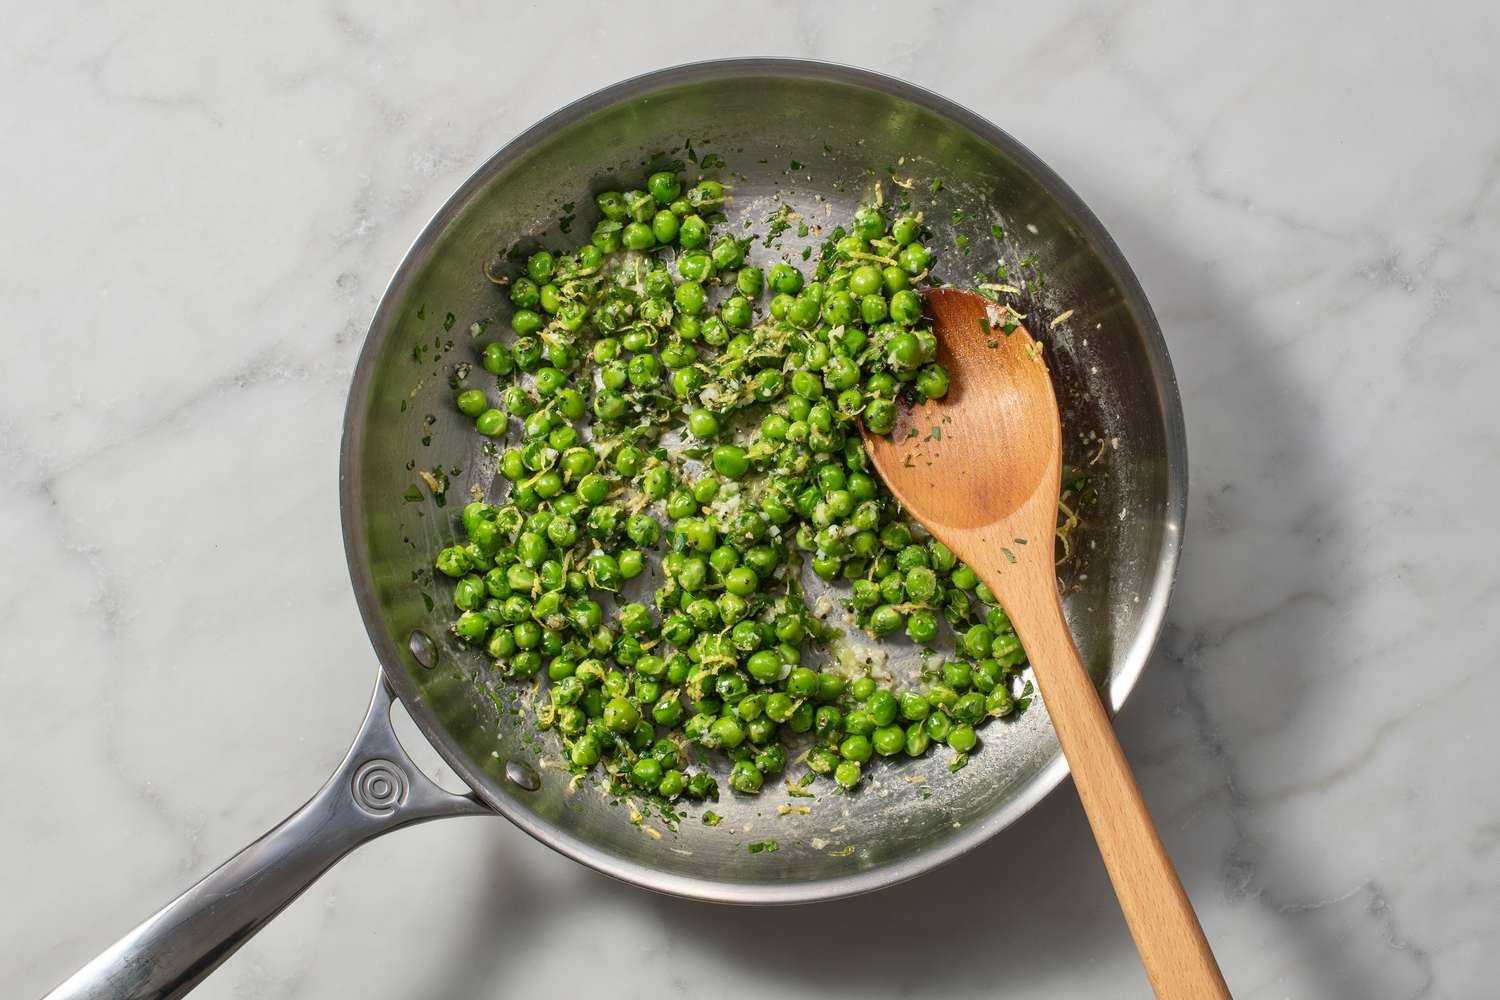 Parsley, salt, pepper, and lemon zest added to the pan of cooked peas